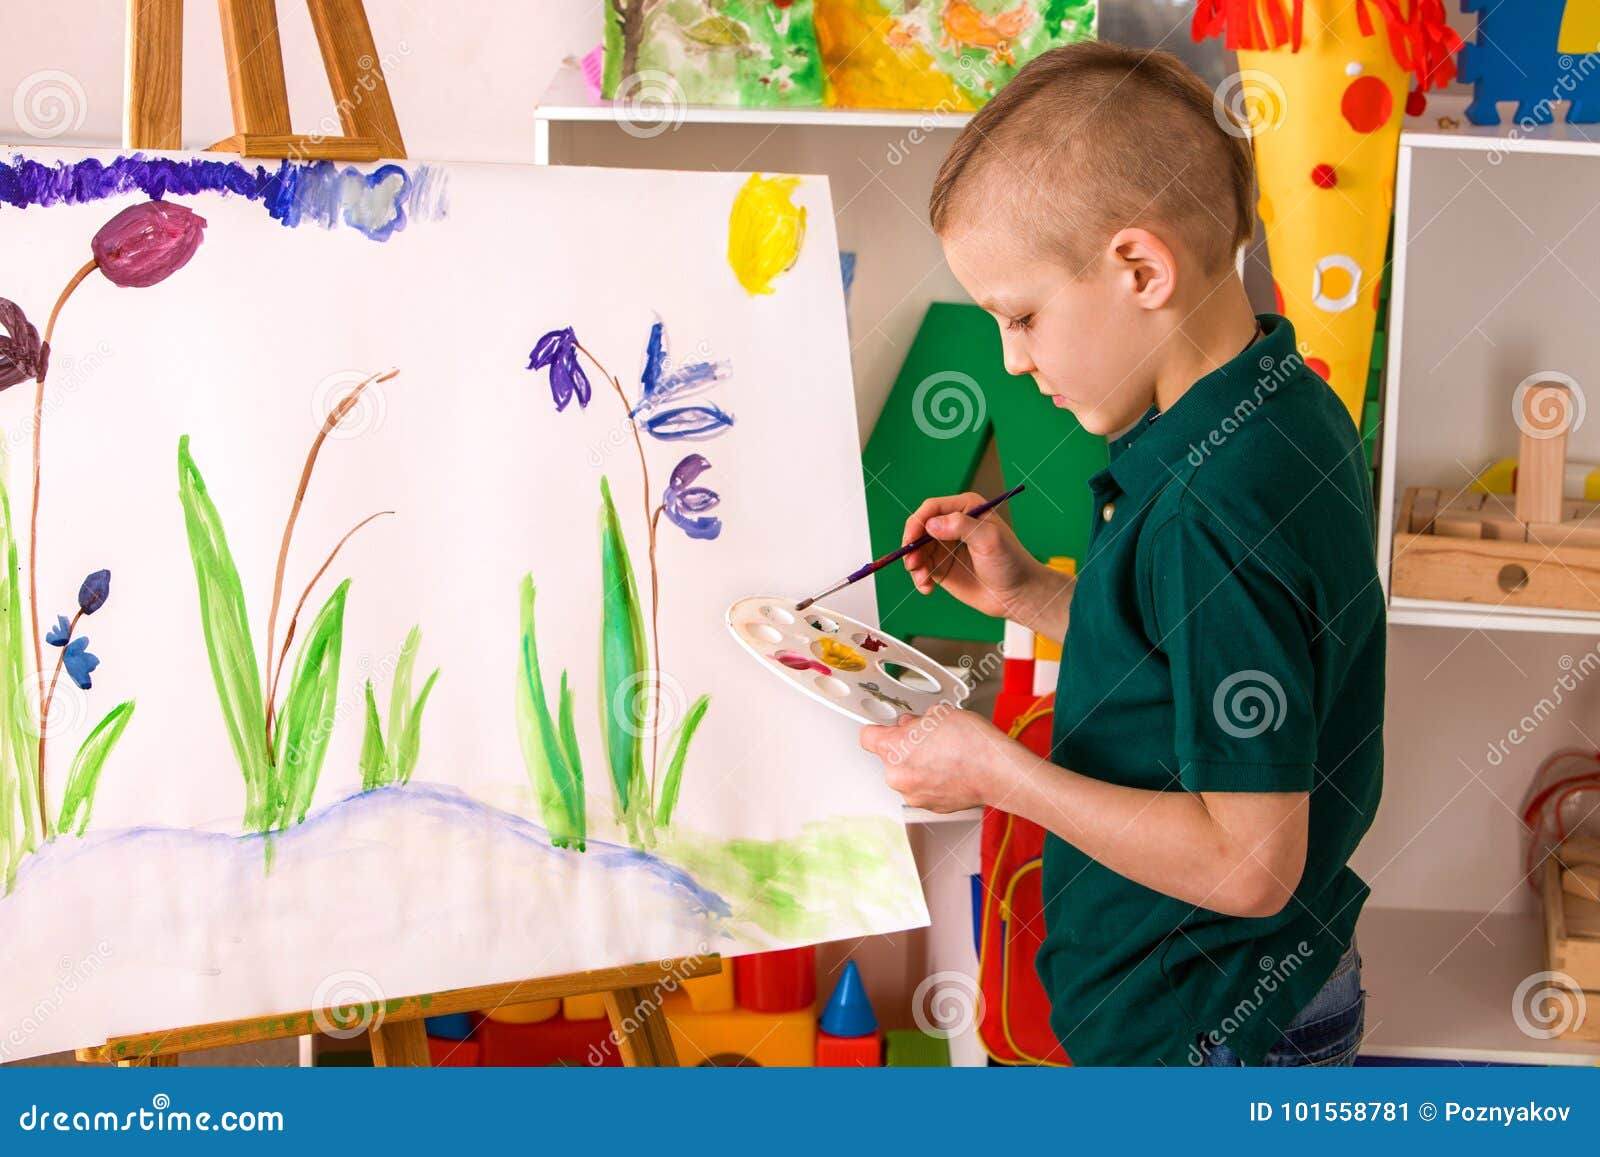 Child Painting Finger On Easel. Kid Boy Learn Paint School